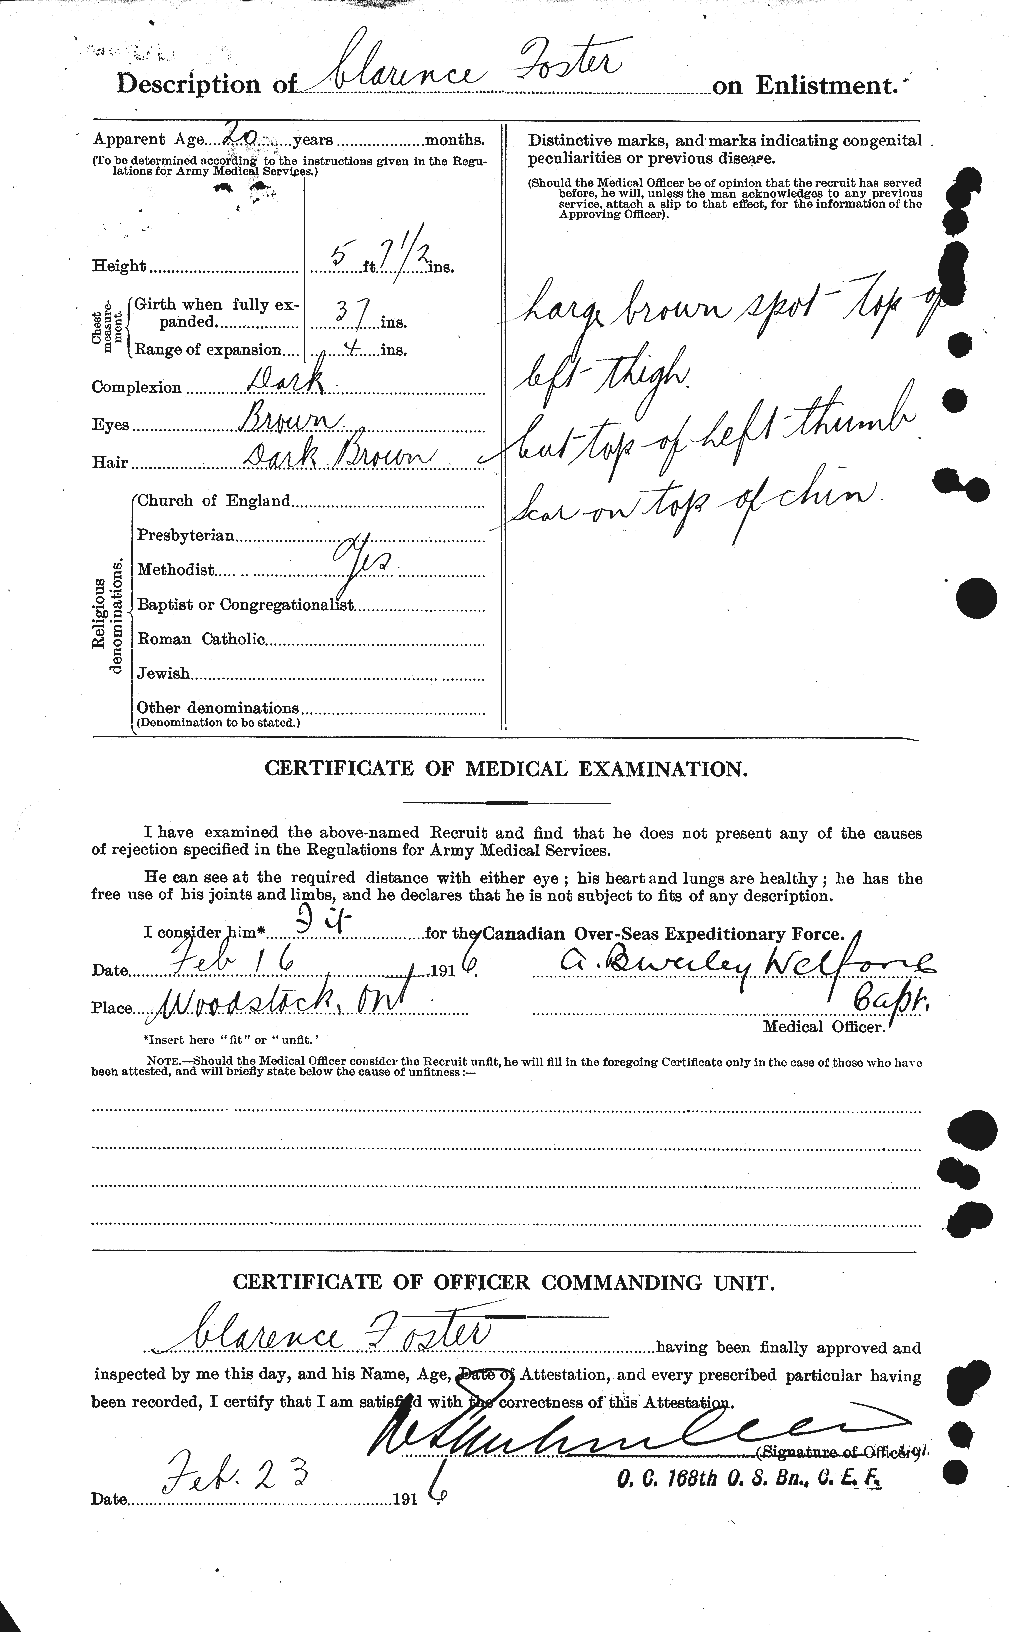 Personnel Records of the First World War - CEF 330533b